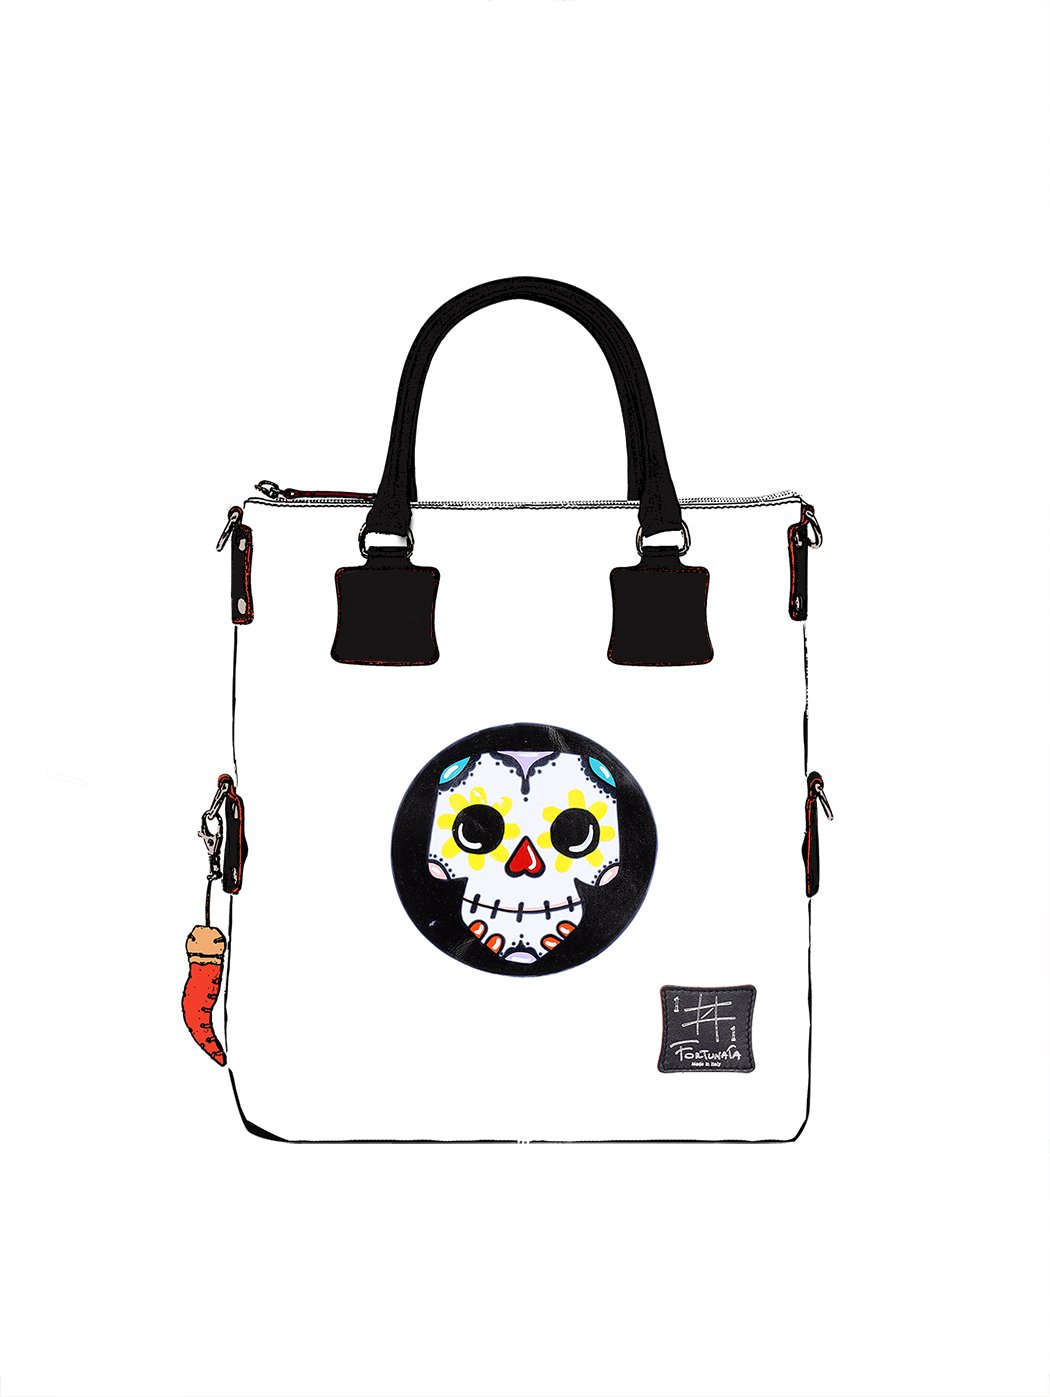 Calavera Tote Bag with shoulder strap - Doodle by Fortunata